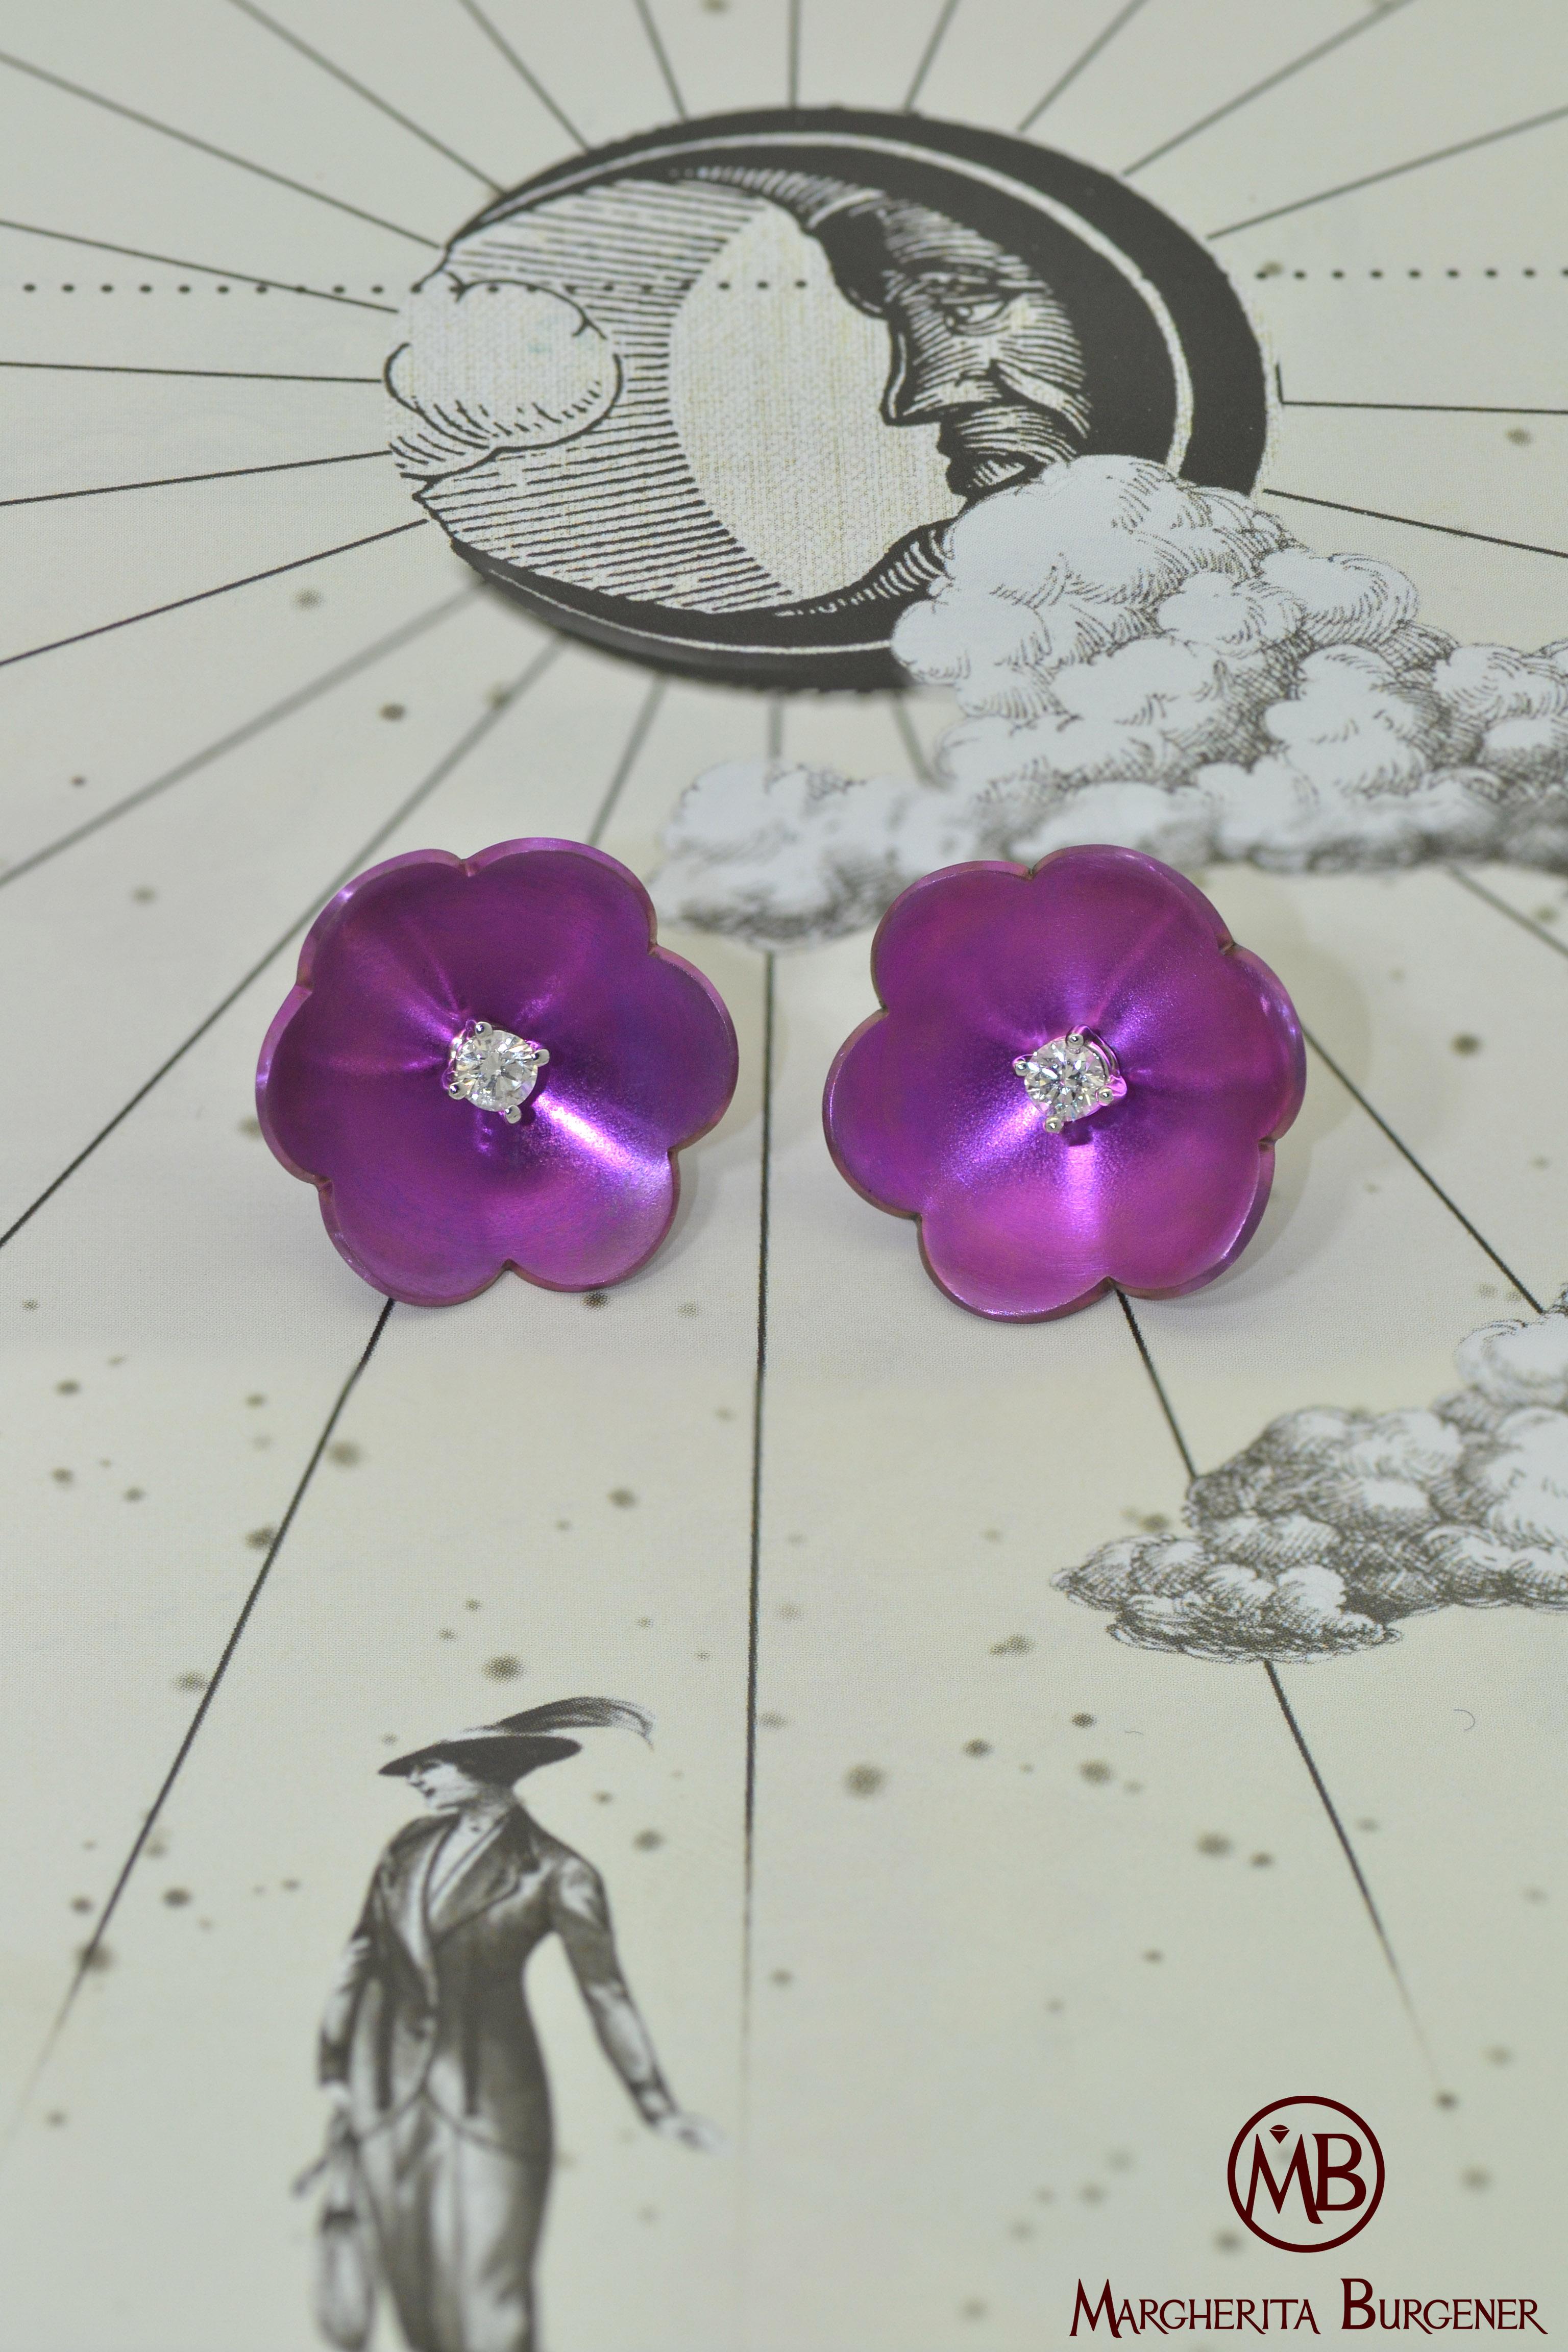 Handcrafted in Margherita Burgener family factory,  the flower motif is in titanium-
The transformer earrings are centering a single diamond set in 18 KT white gold. 
Diamonds can be taken out from the flower  and used as single studs.
Perfect as